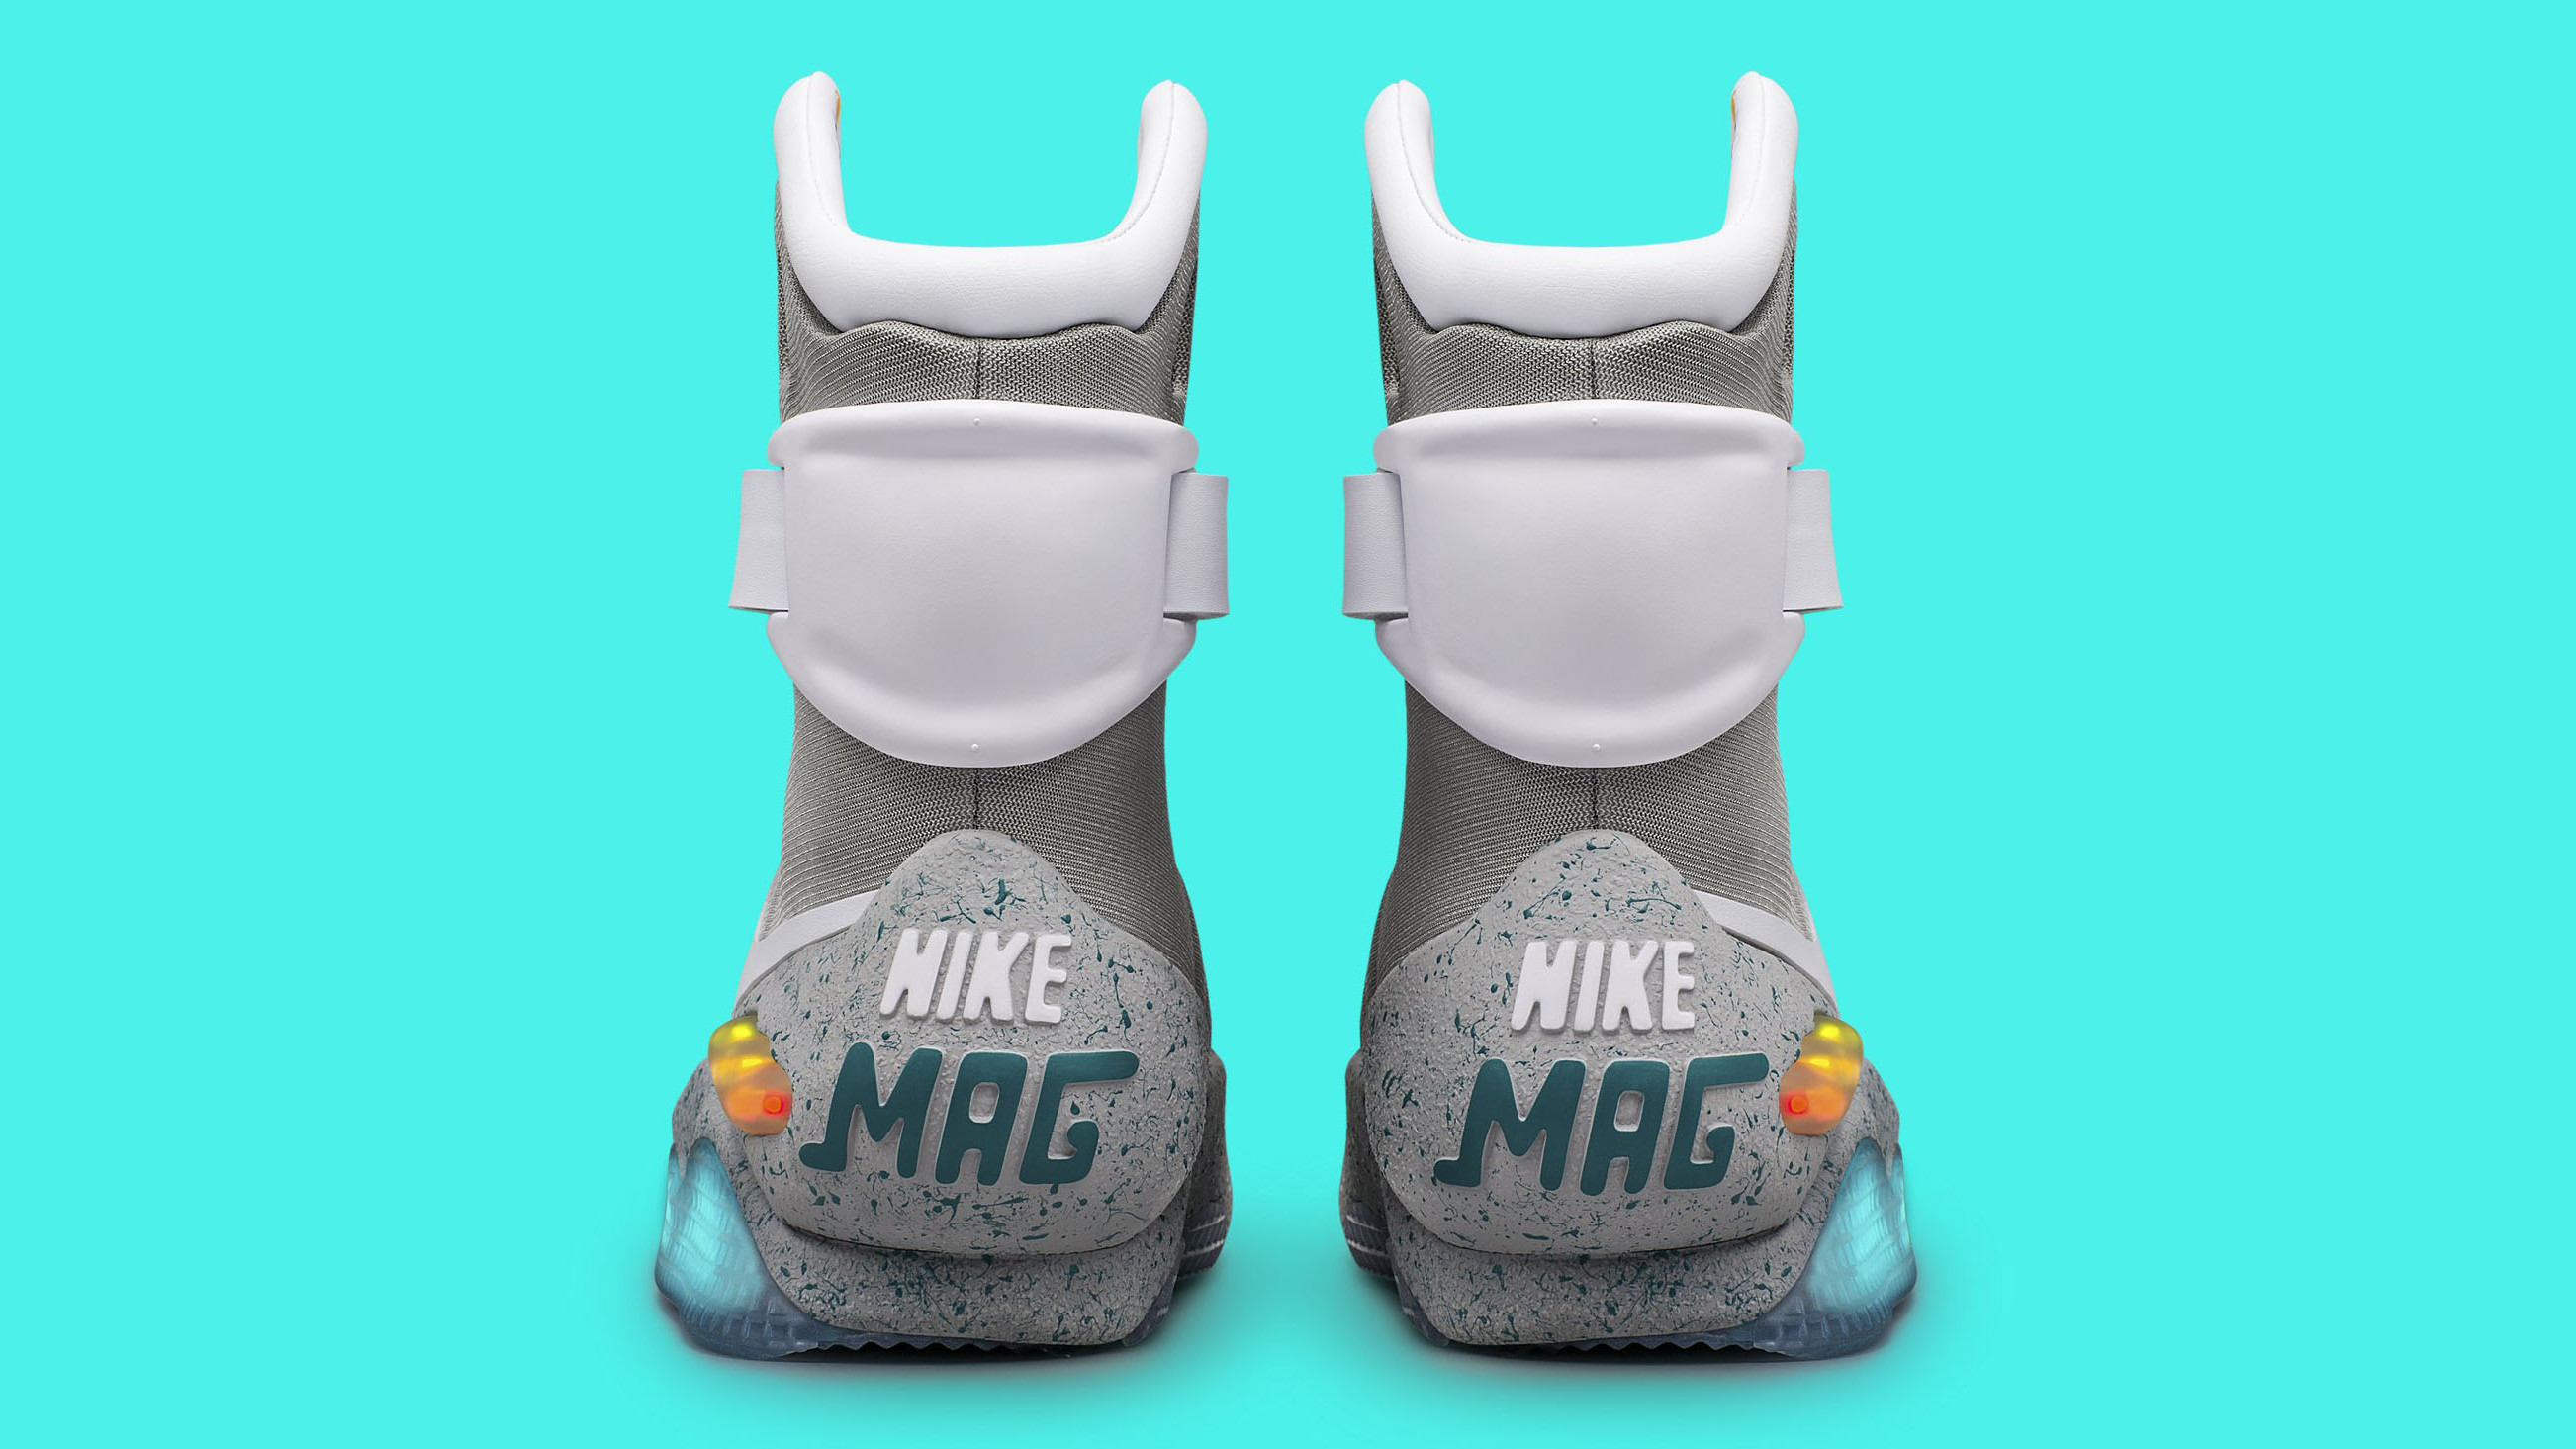 Sin personal Coca Mal humor How Much Are Nike Mag Back to the Future Sneakers | Sole Collector